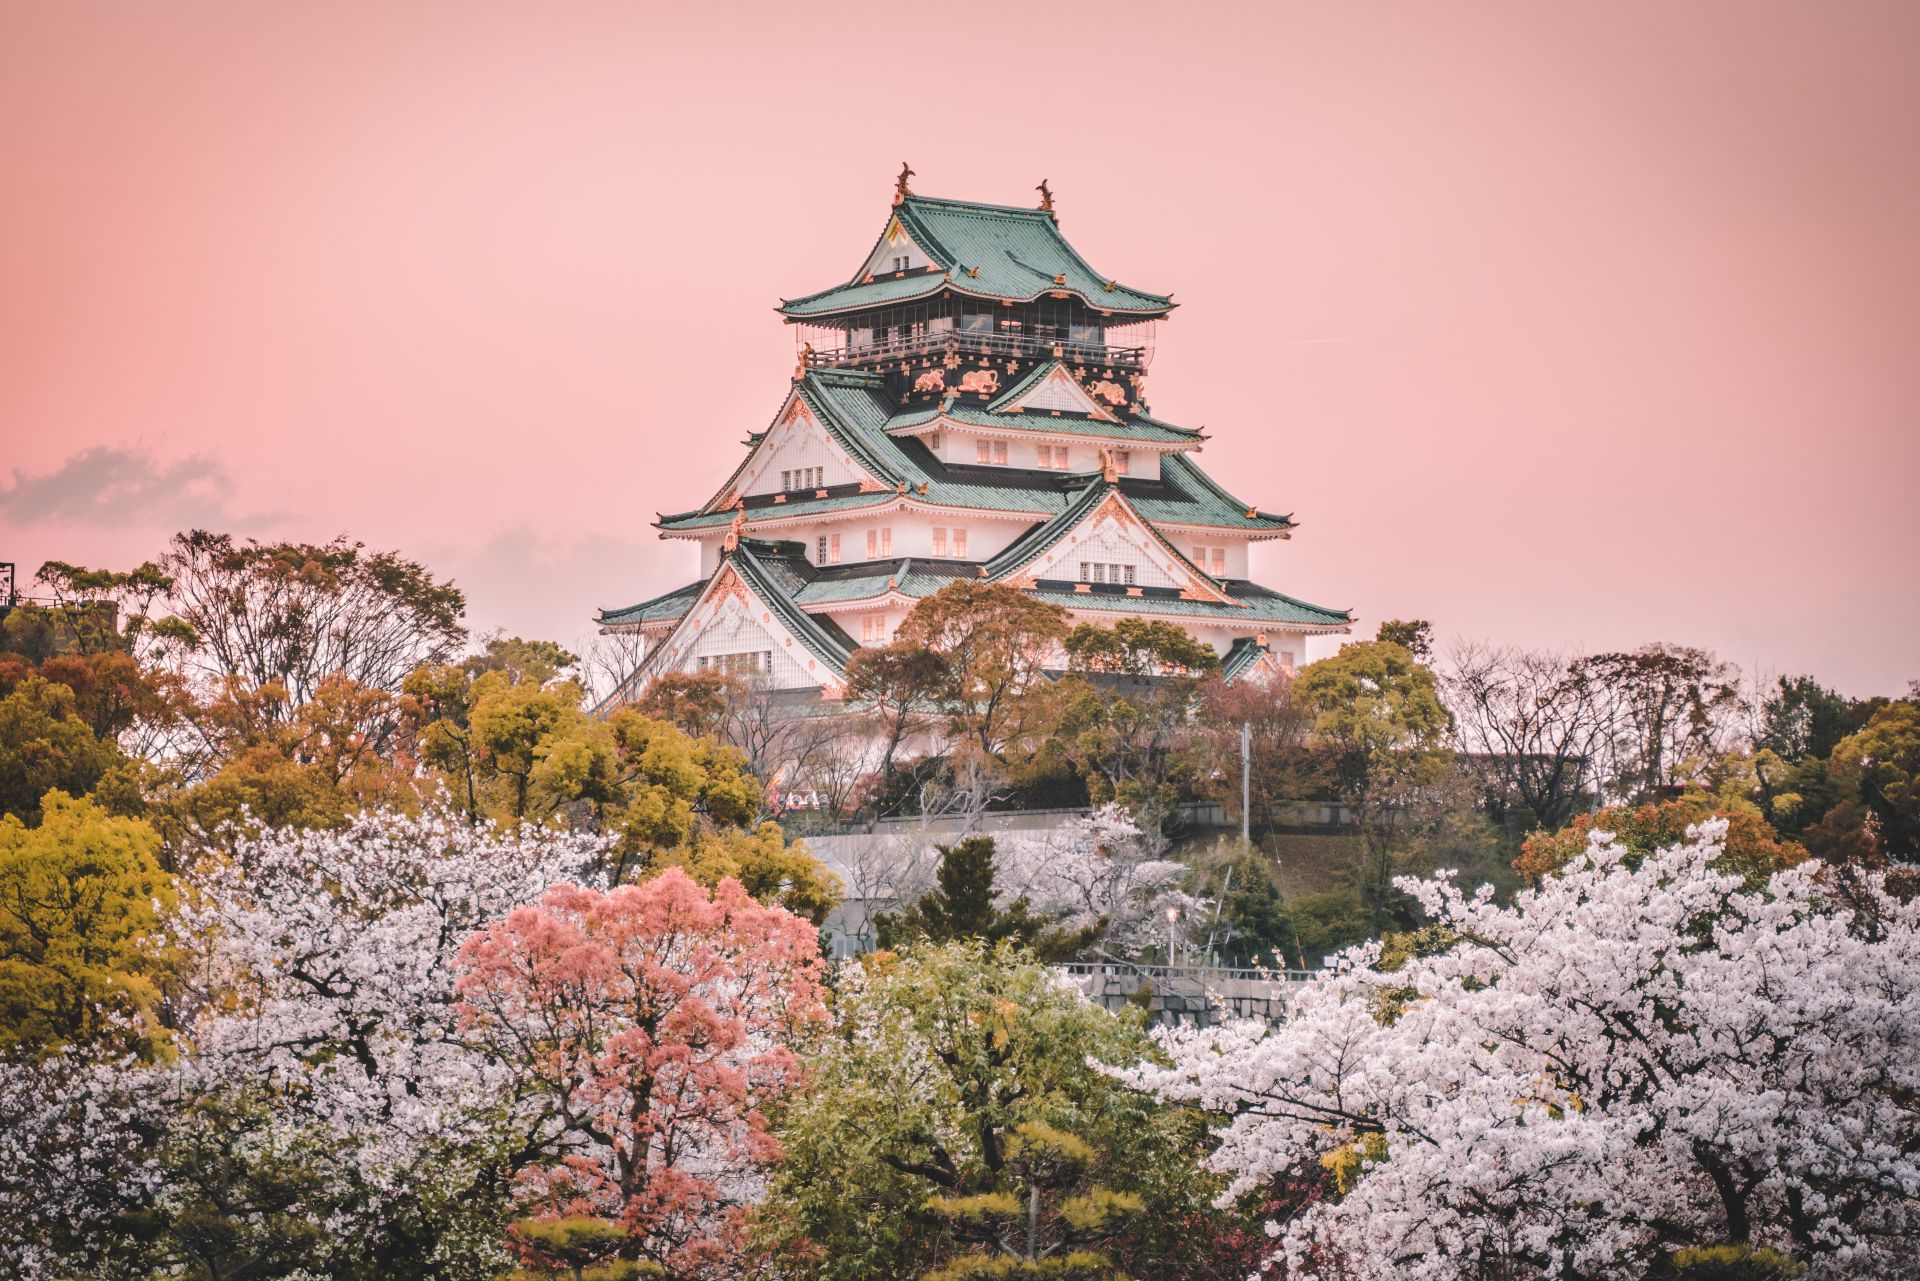 Osaka castle and cherry blossom, with Fuji mountain background